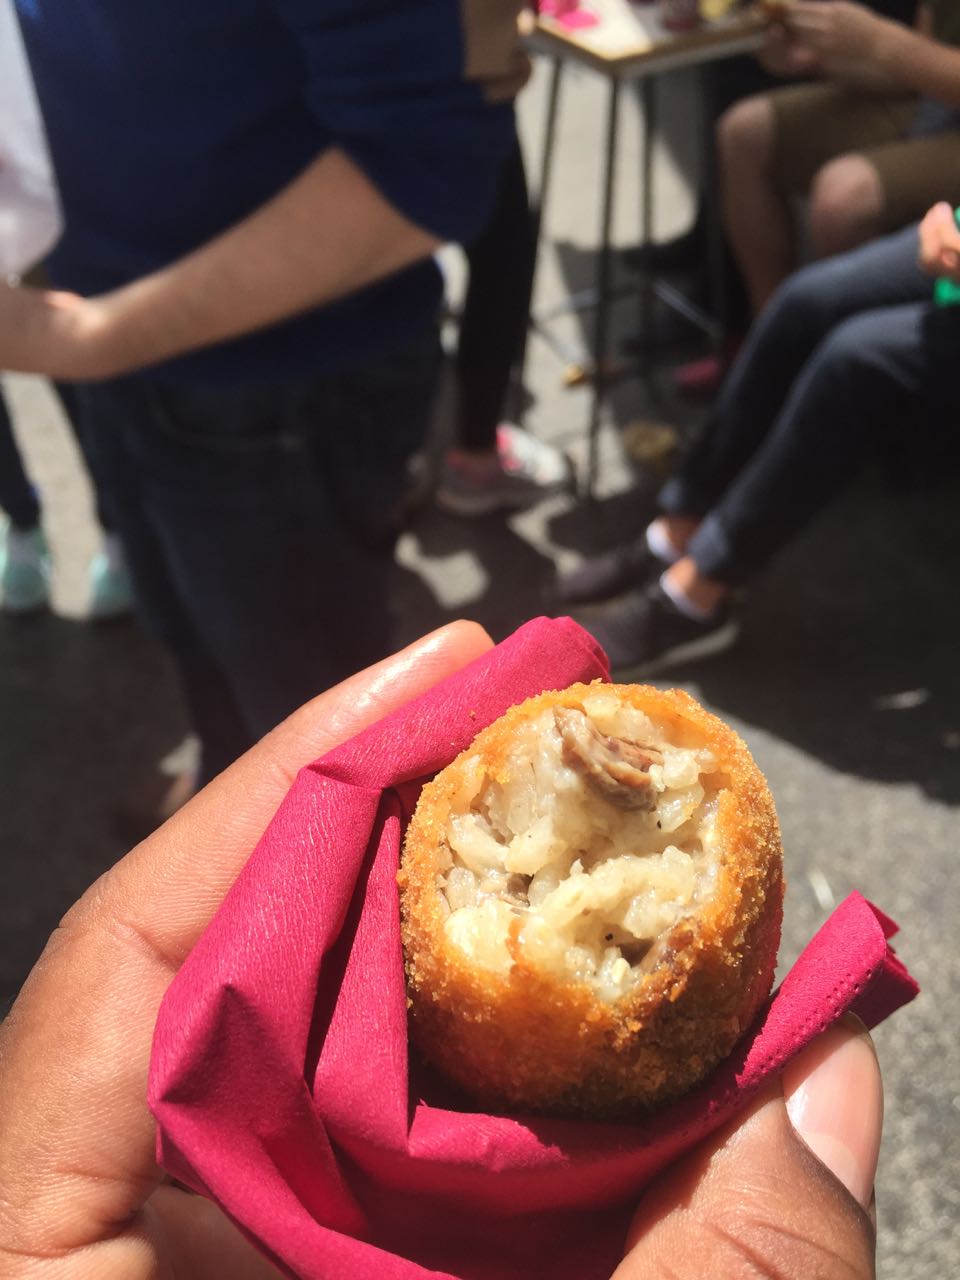 This is a Roman delicacy called Suppli, it is fried rice balls cooked in meat broth. It is unbelievably good when it is hot, and a small place called Trapizzino makes the best kind.